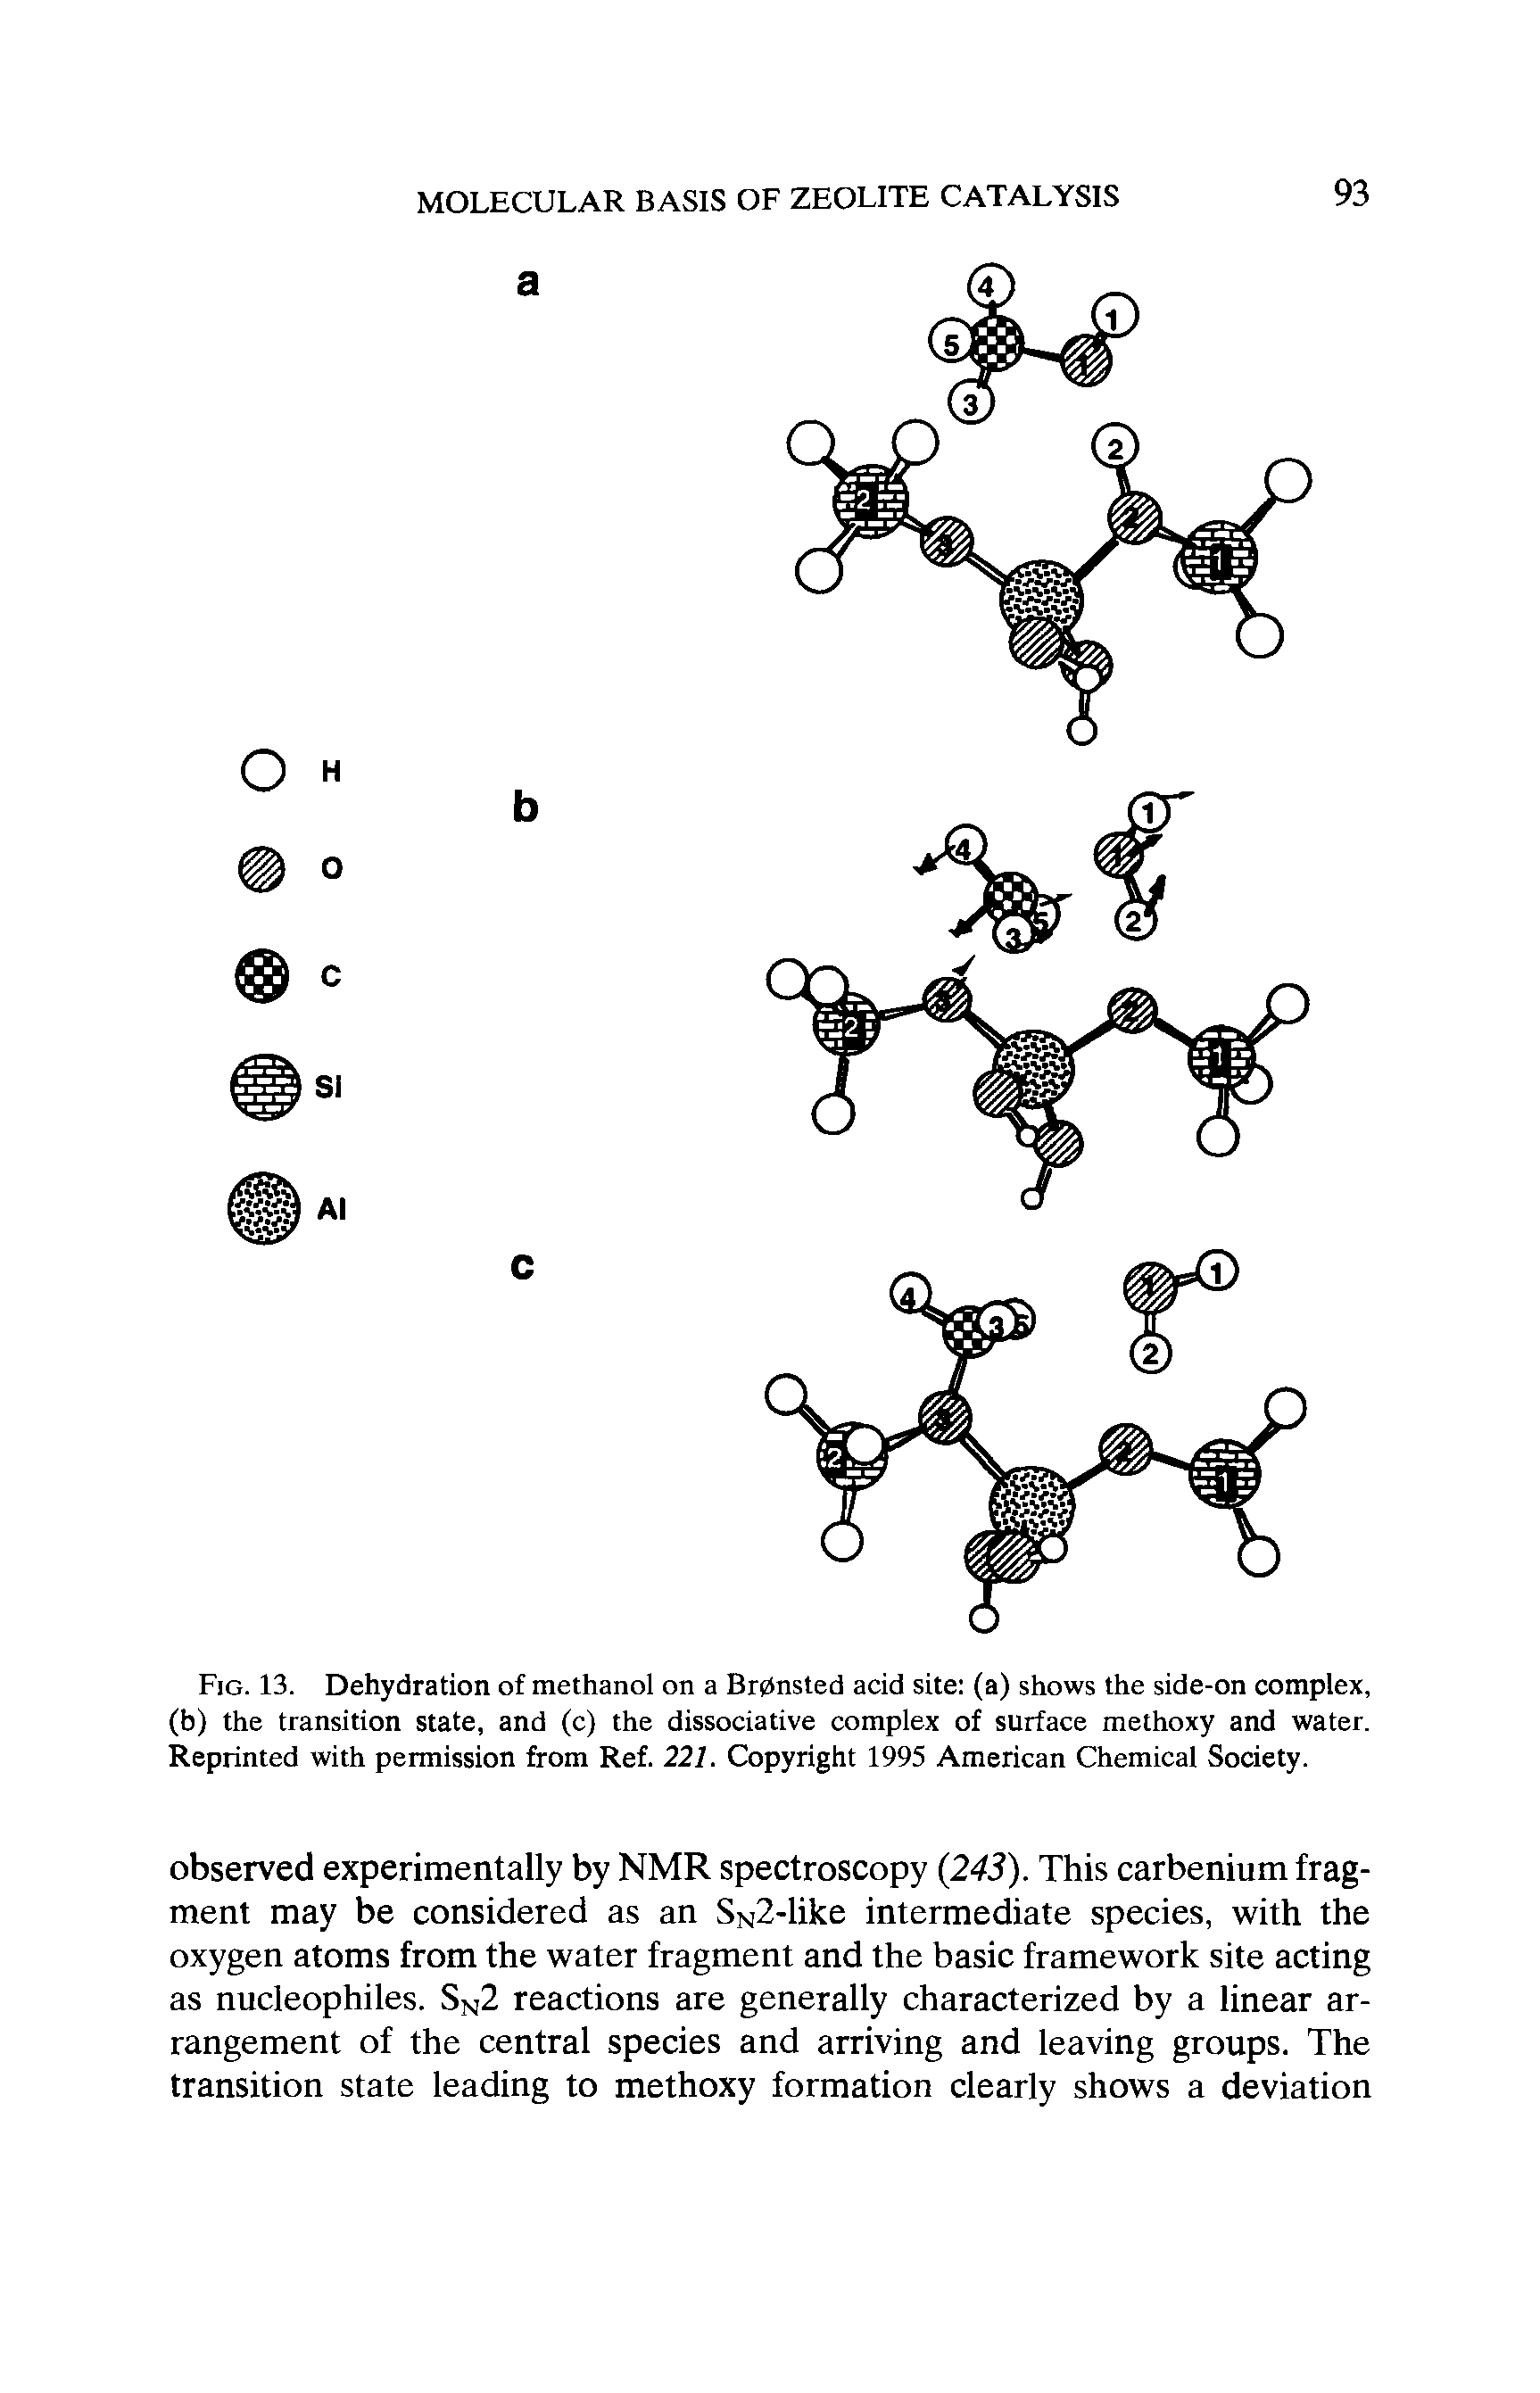 Fig. 13. Dehydration of methanol on a Brdnsted acid site (a) shows the side-on complex, (b) the transition state, and (c) the dissociative complex of surface methoxy and water. Reprinted with permission from Ref. 221. Copyright 1995 American Chemical Society.